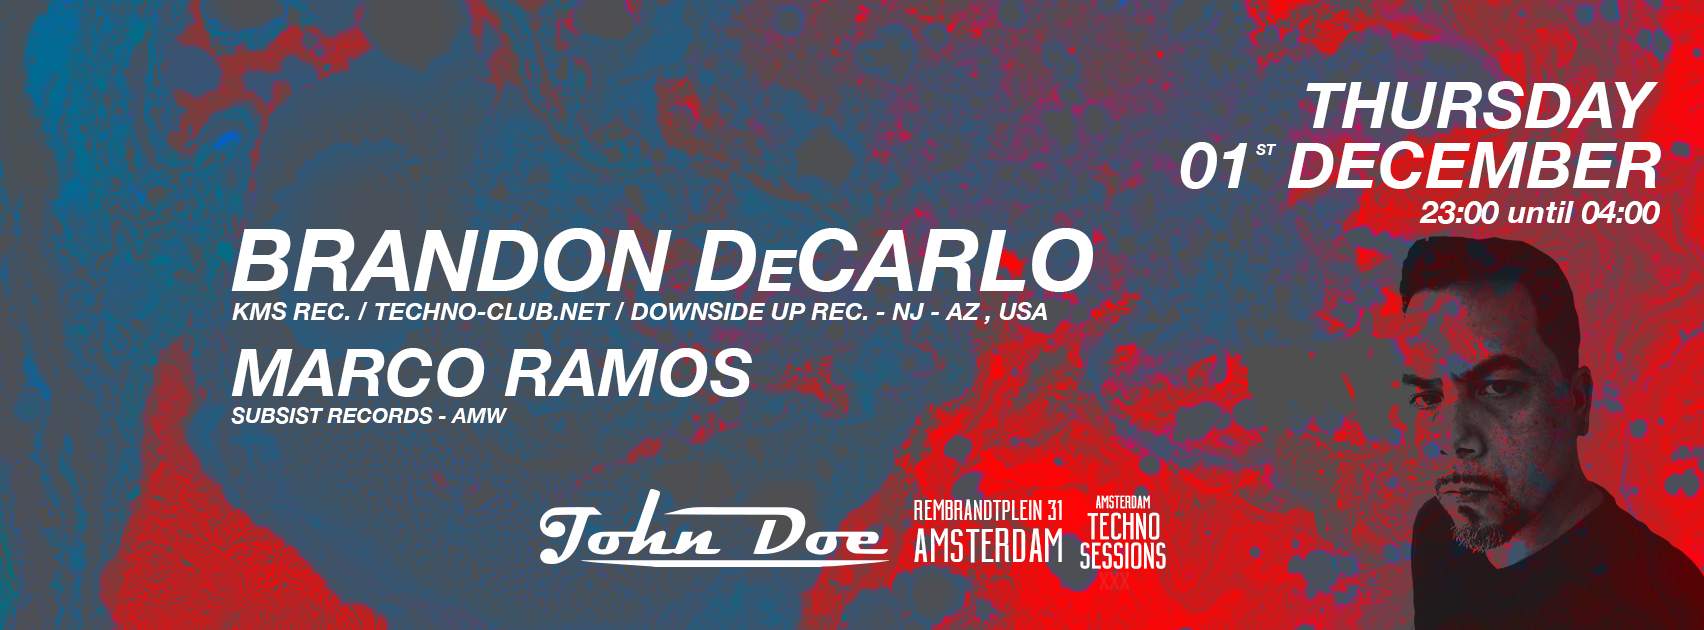 Amsterdam Techno Sessions with Brandon DeCarlo (KMS Rec./Downside up Rec.) US - フライヤー裏